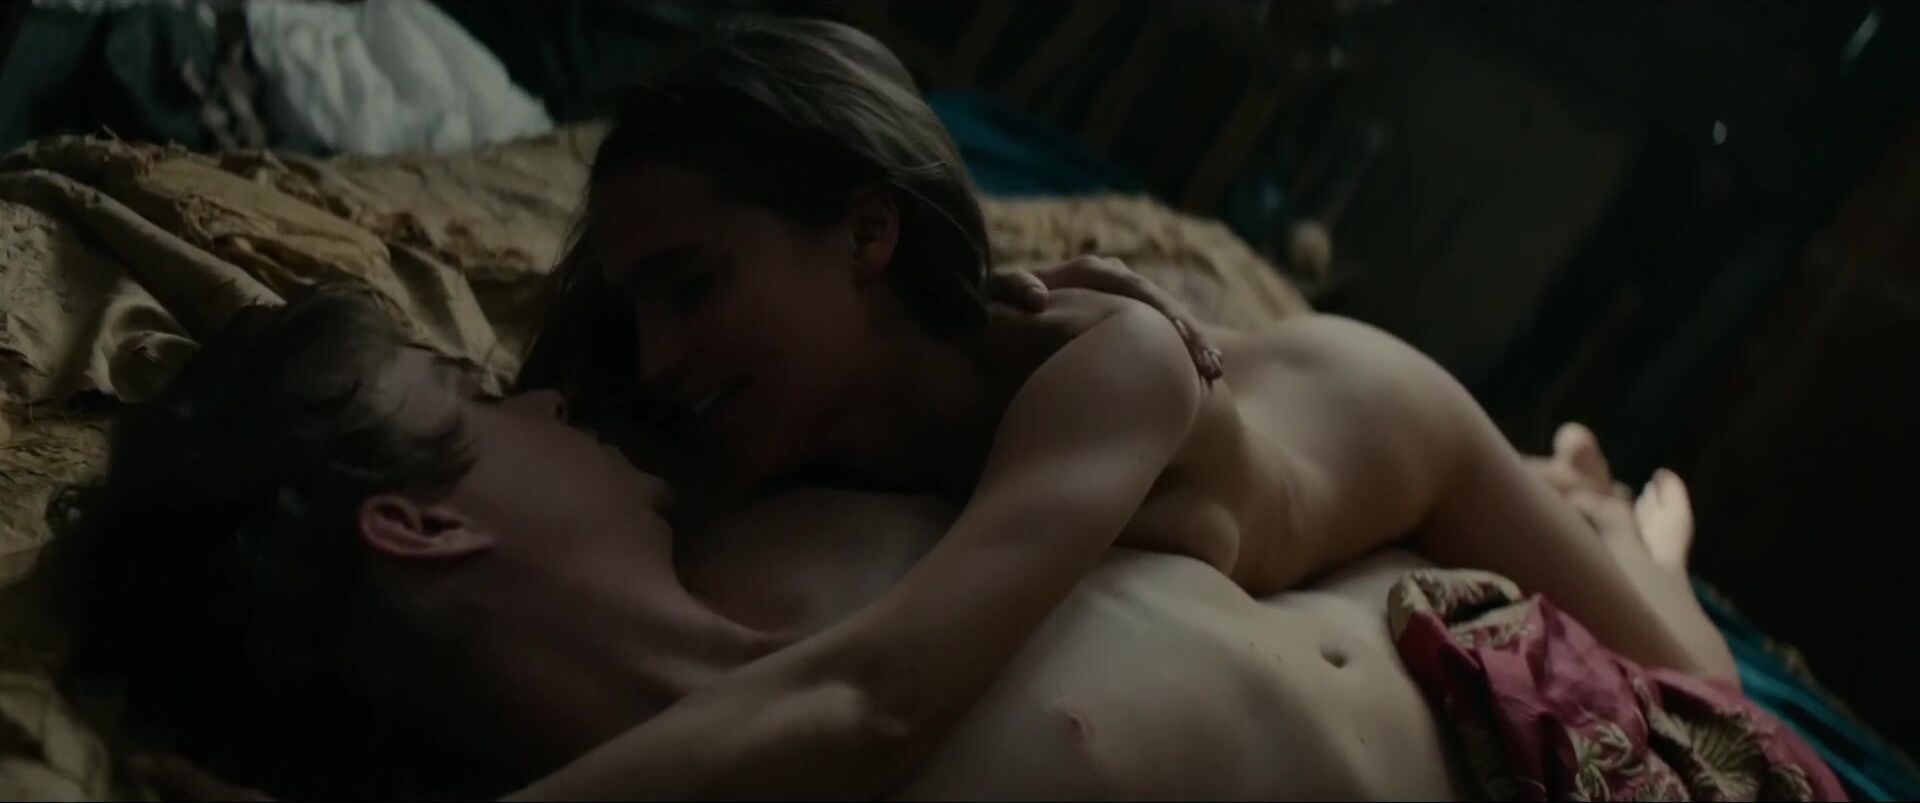 African Hot sex scenes of Alicia Vikander and other actresses being penetrated in Tulip Fever Freaky - 1